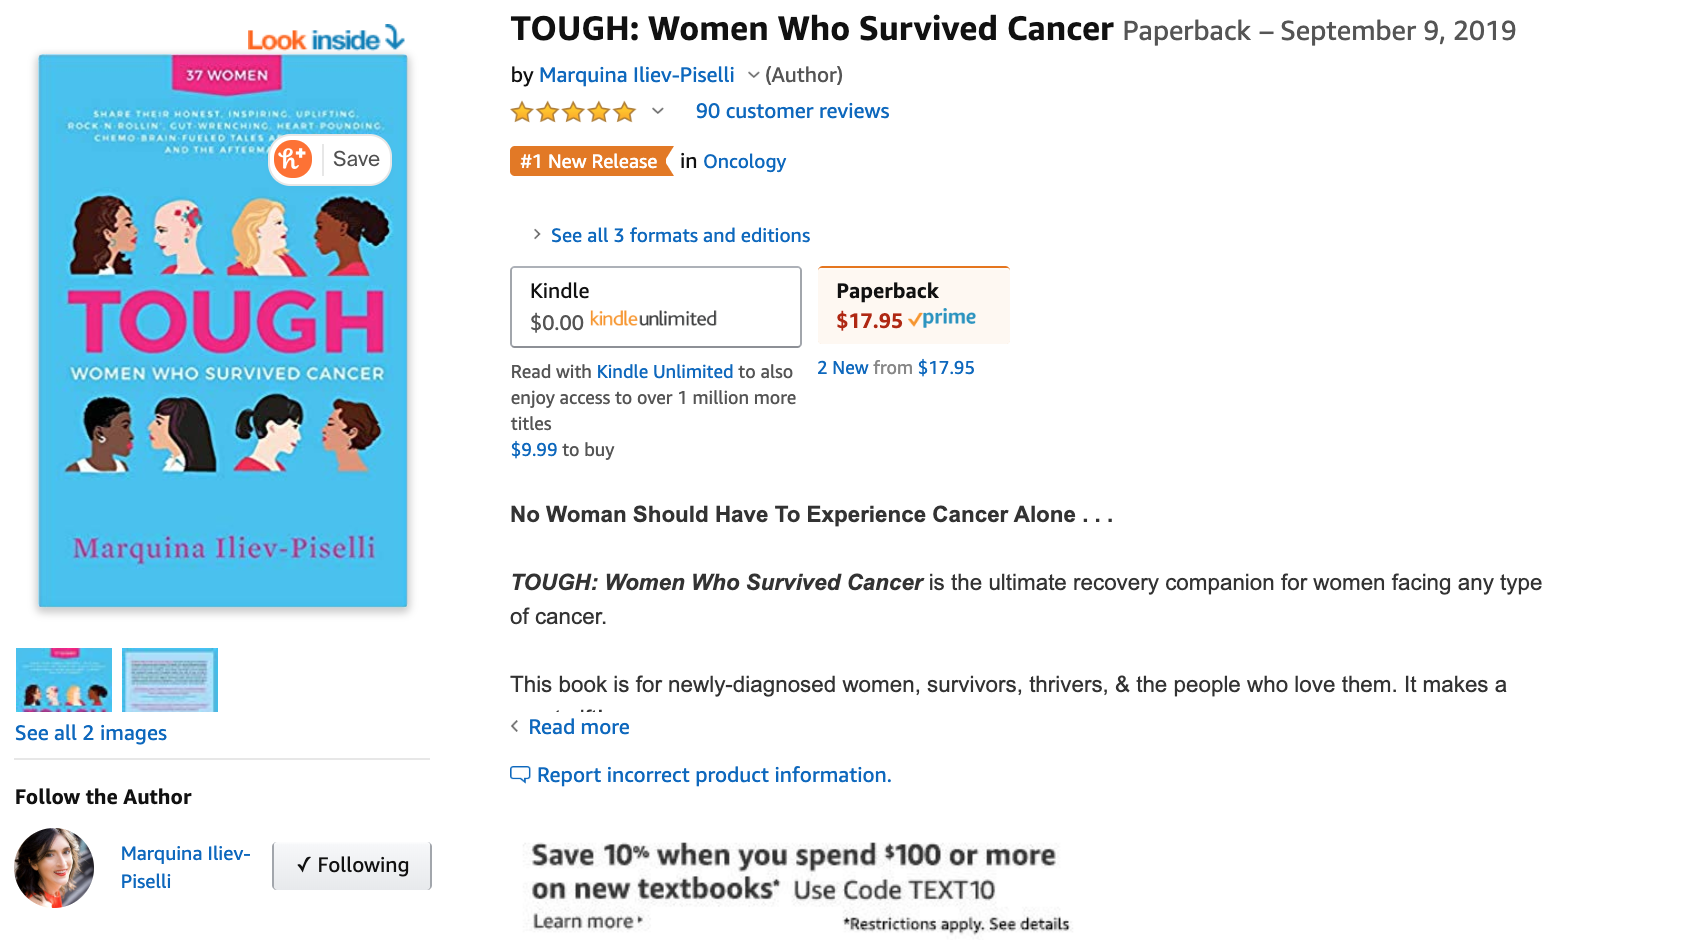 The book 'TOUGH: Women Who Survived Cancer' is a #1 New Release and has 90 book reviews in 1 week